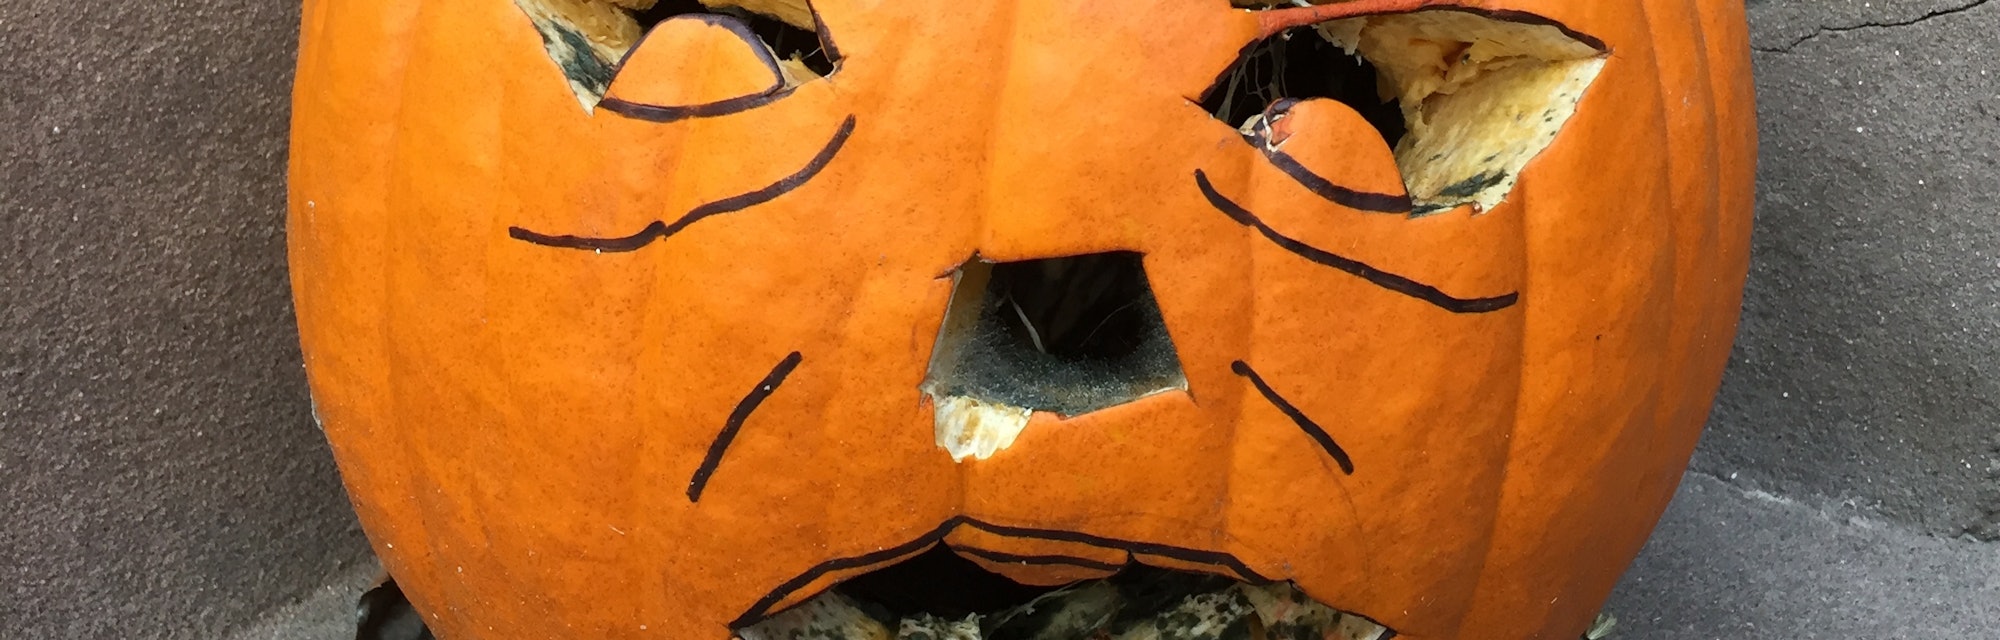 A pumpkin sitting on an outdoors brownstone wall with a carved face and rotten moldy teeth in Fort G...